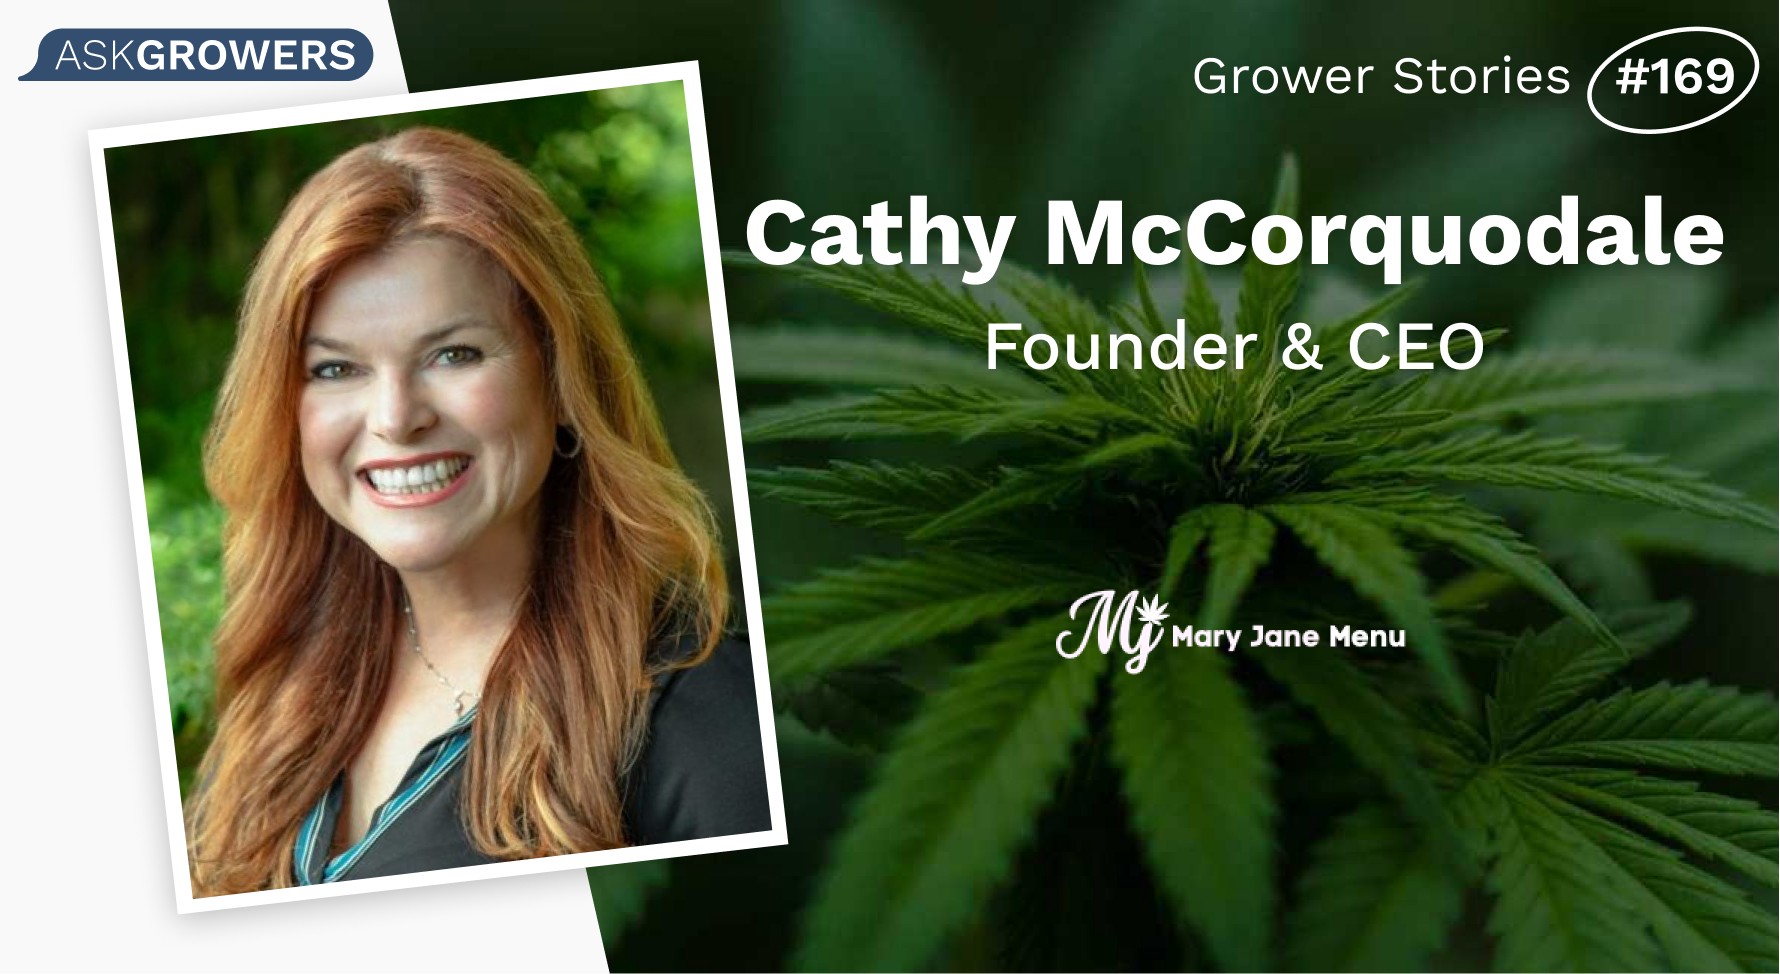 Grower Stories #169: Cathy McCorquodale